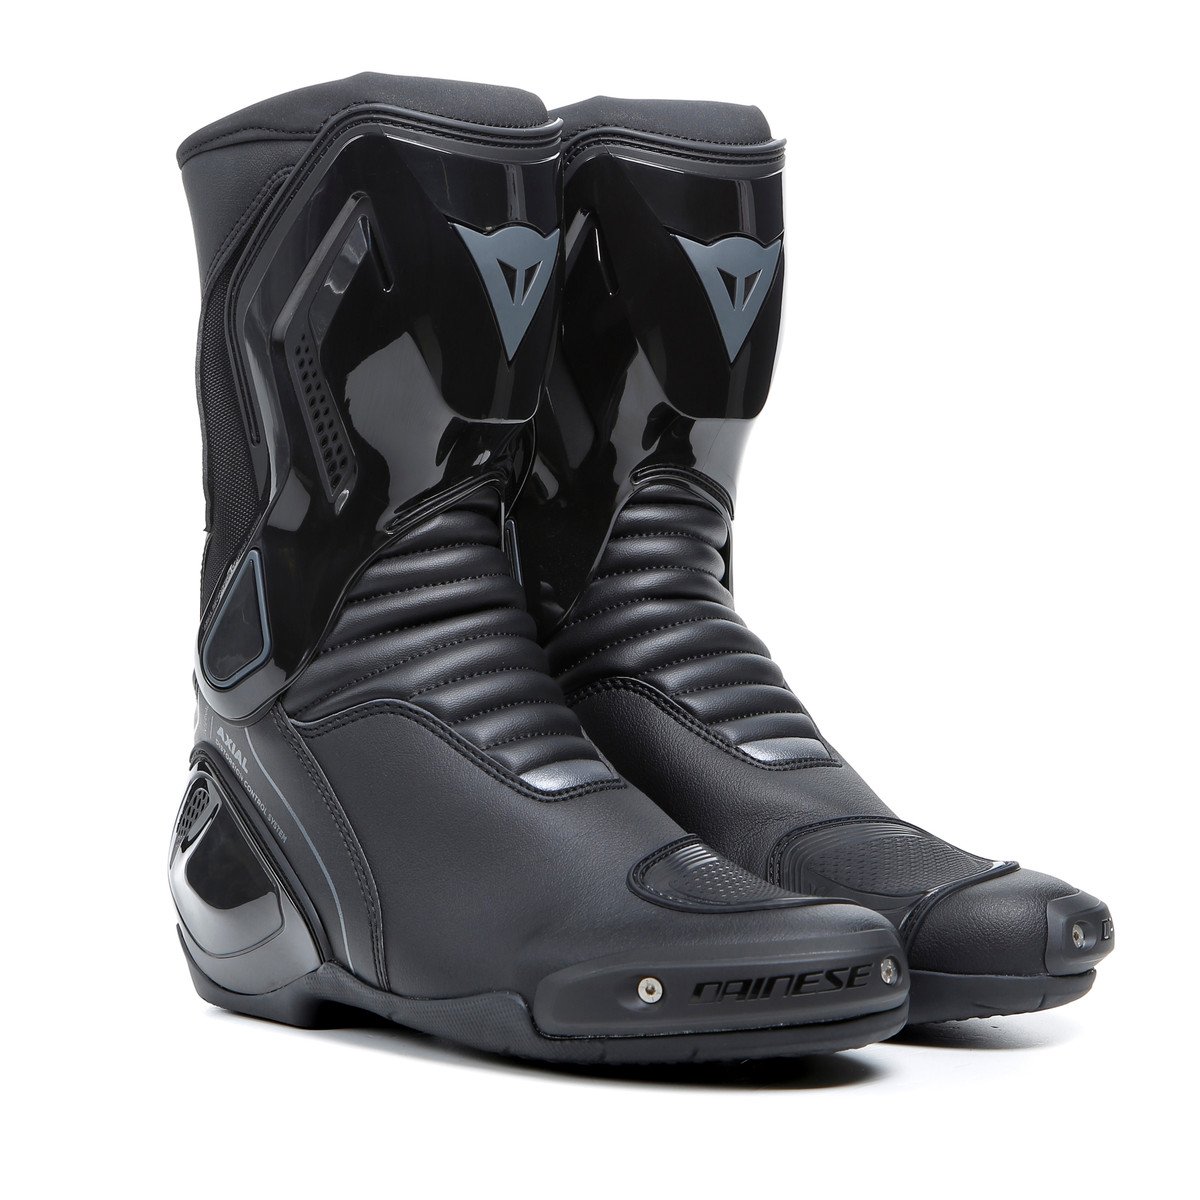 Image of Dainese Nexus 2 Boots Black Size 40 ID 8051019292469